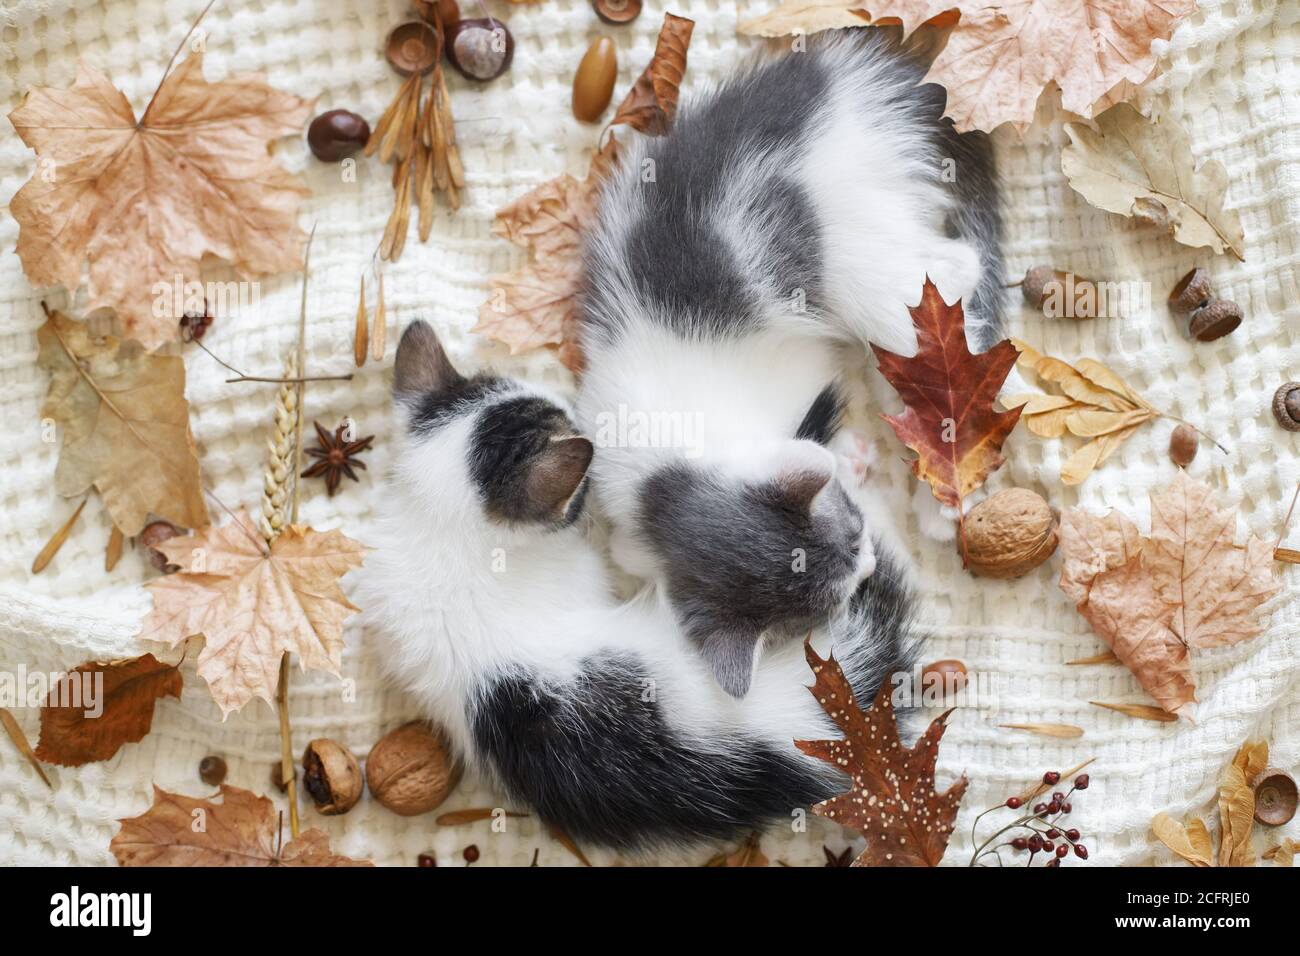 Autumn cozy mood. Adorable kittens sleeping in autumn leaves on blanket, top view. Two cute white and grey kittens cuddling and snoozing in fall decor Stock Photo